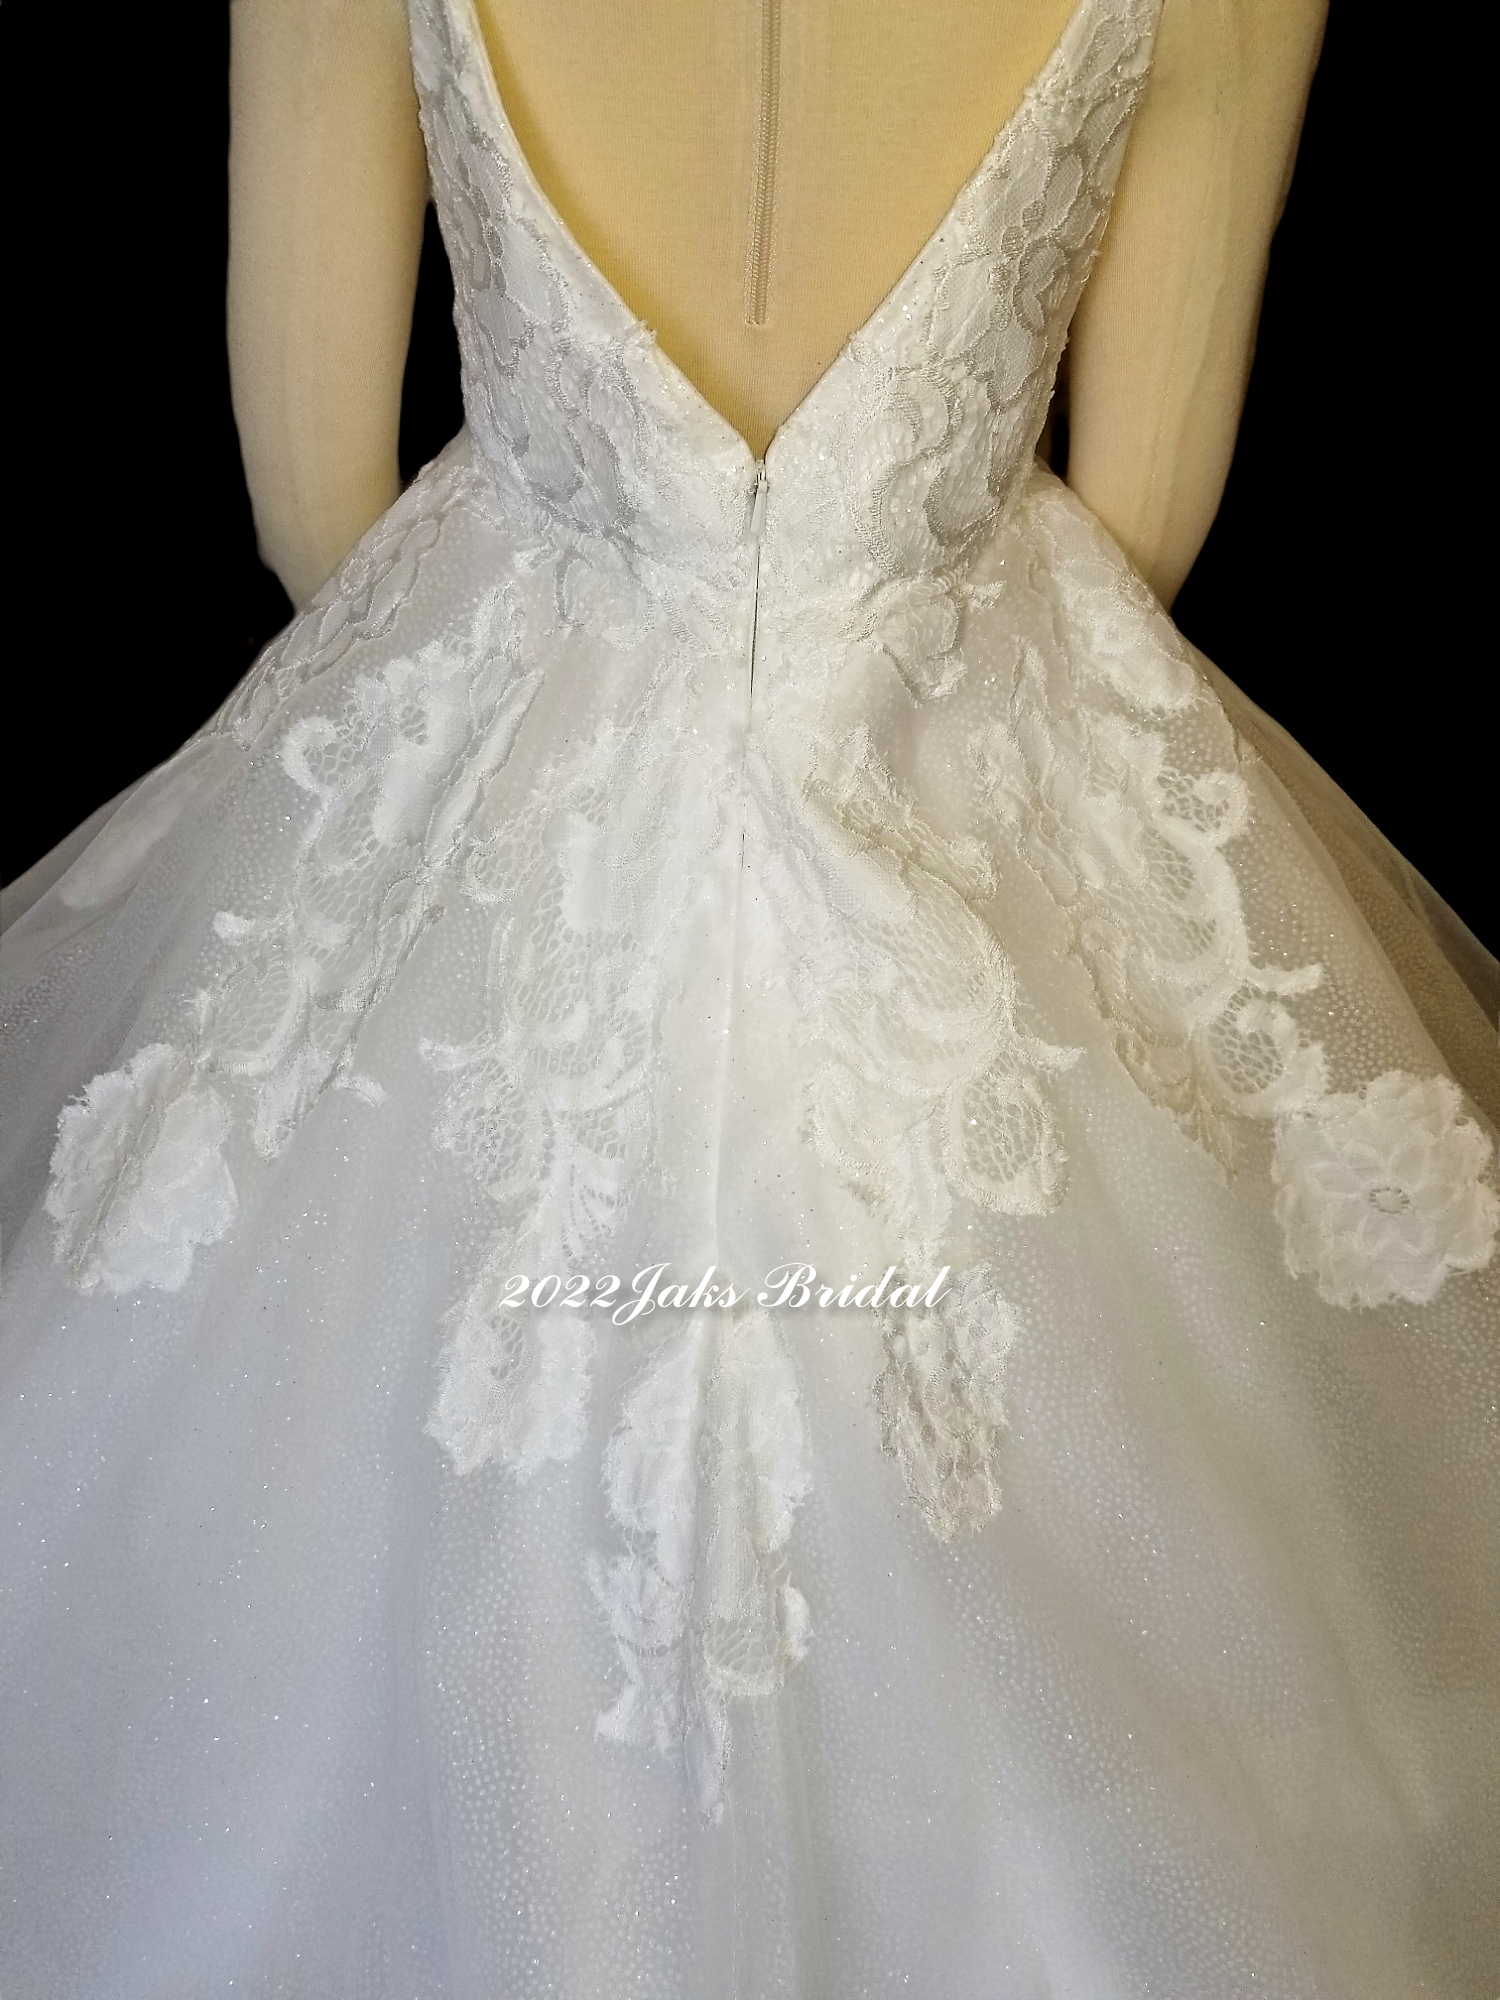 Flower girl dress with plunging neckline, illusion modesty panel, side cut outs, full tulle skirt with lace appliques.